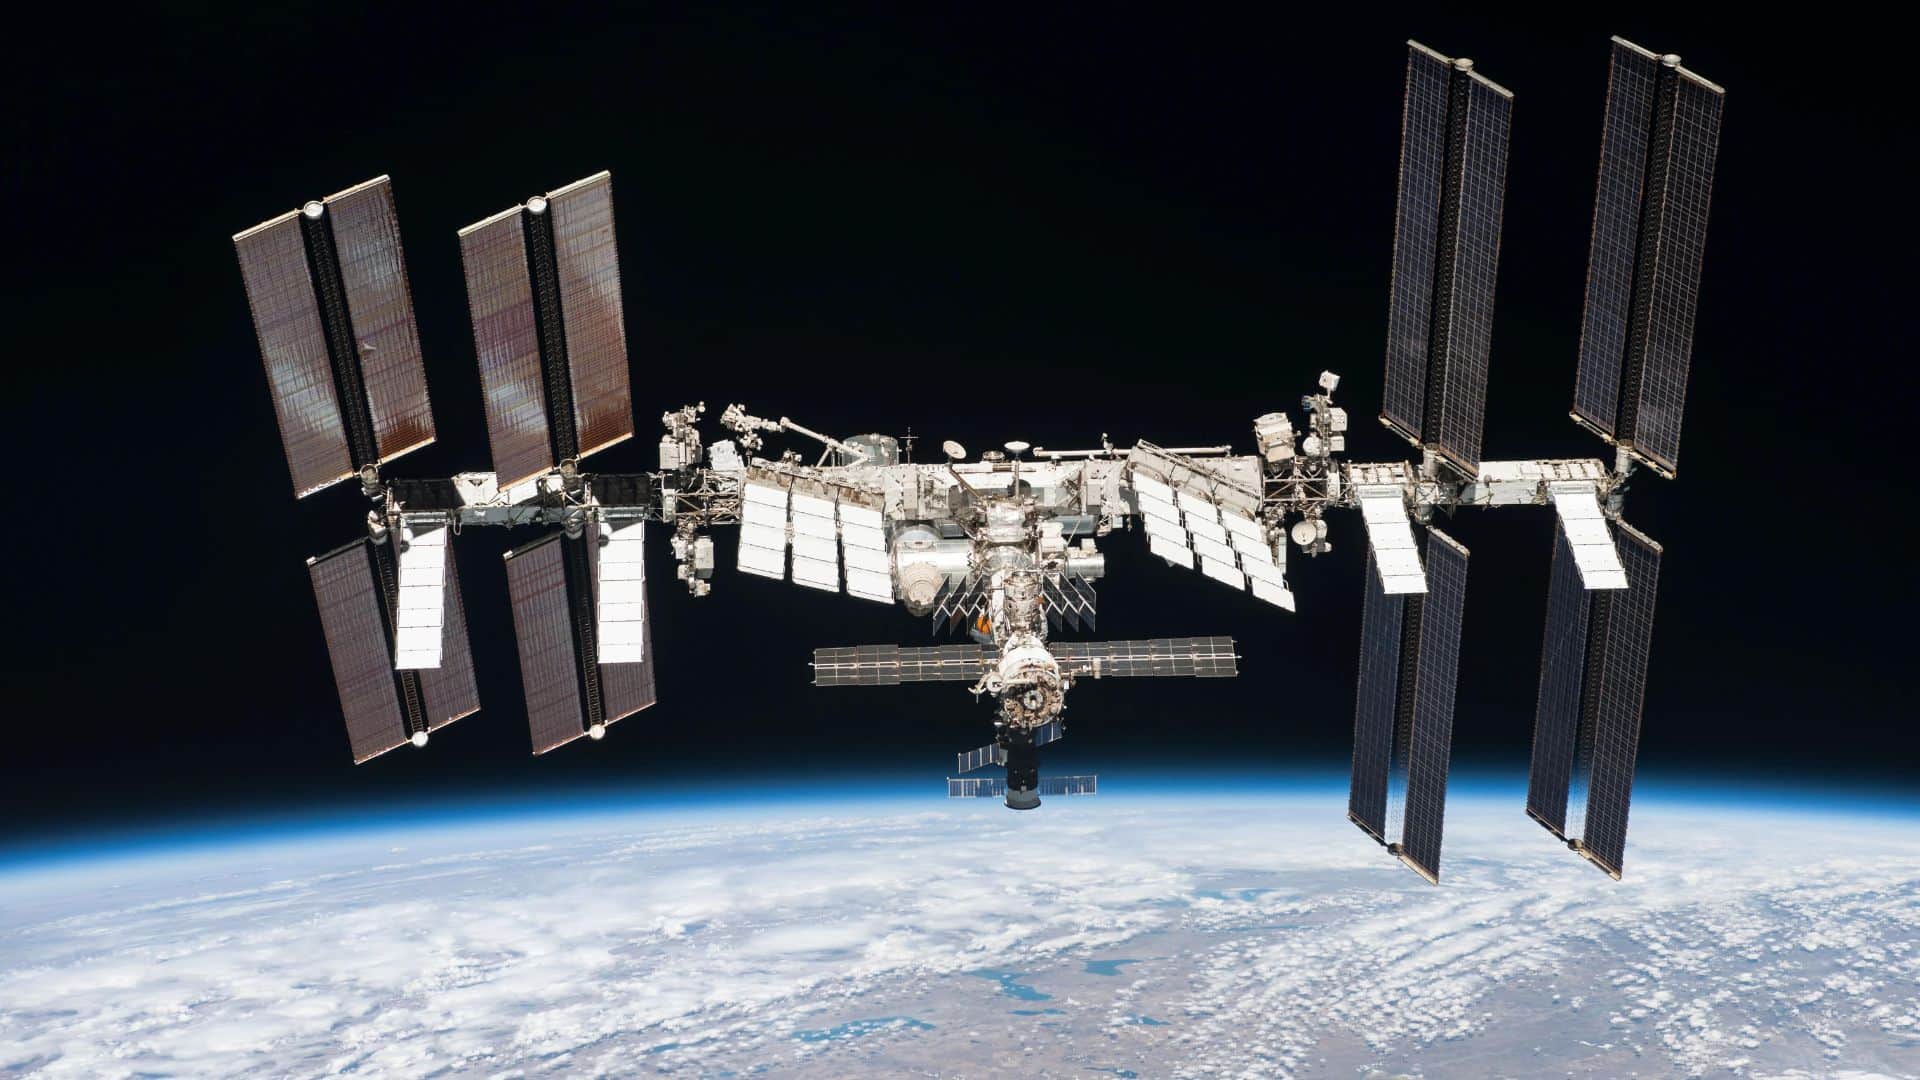 The International Space Station in low Earth orbit